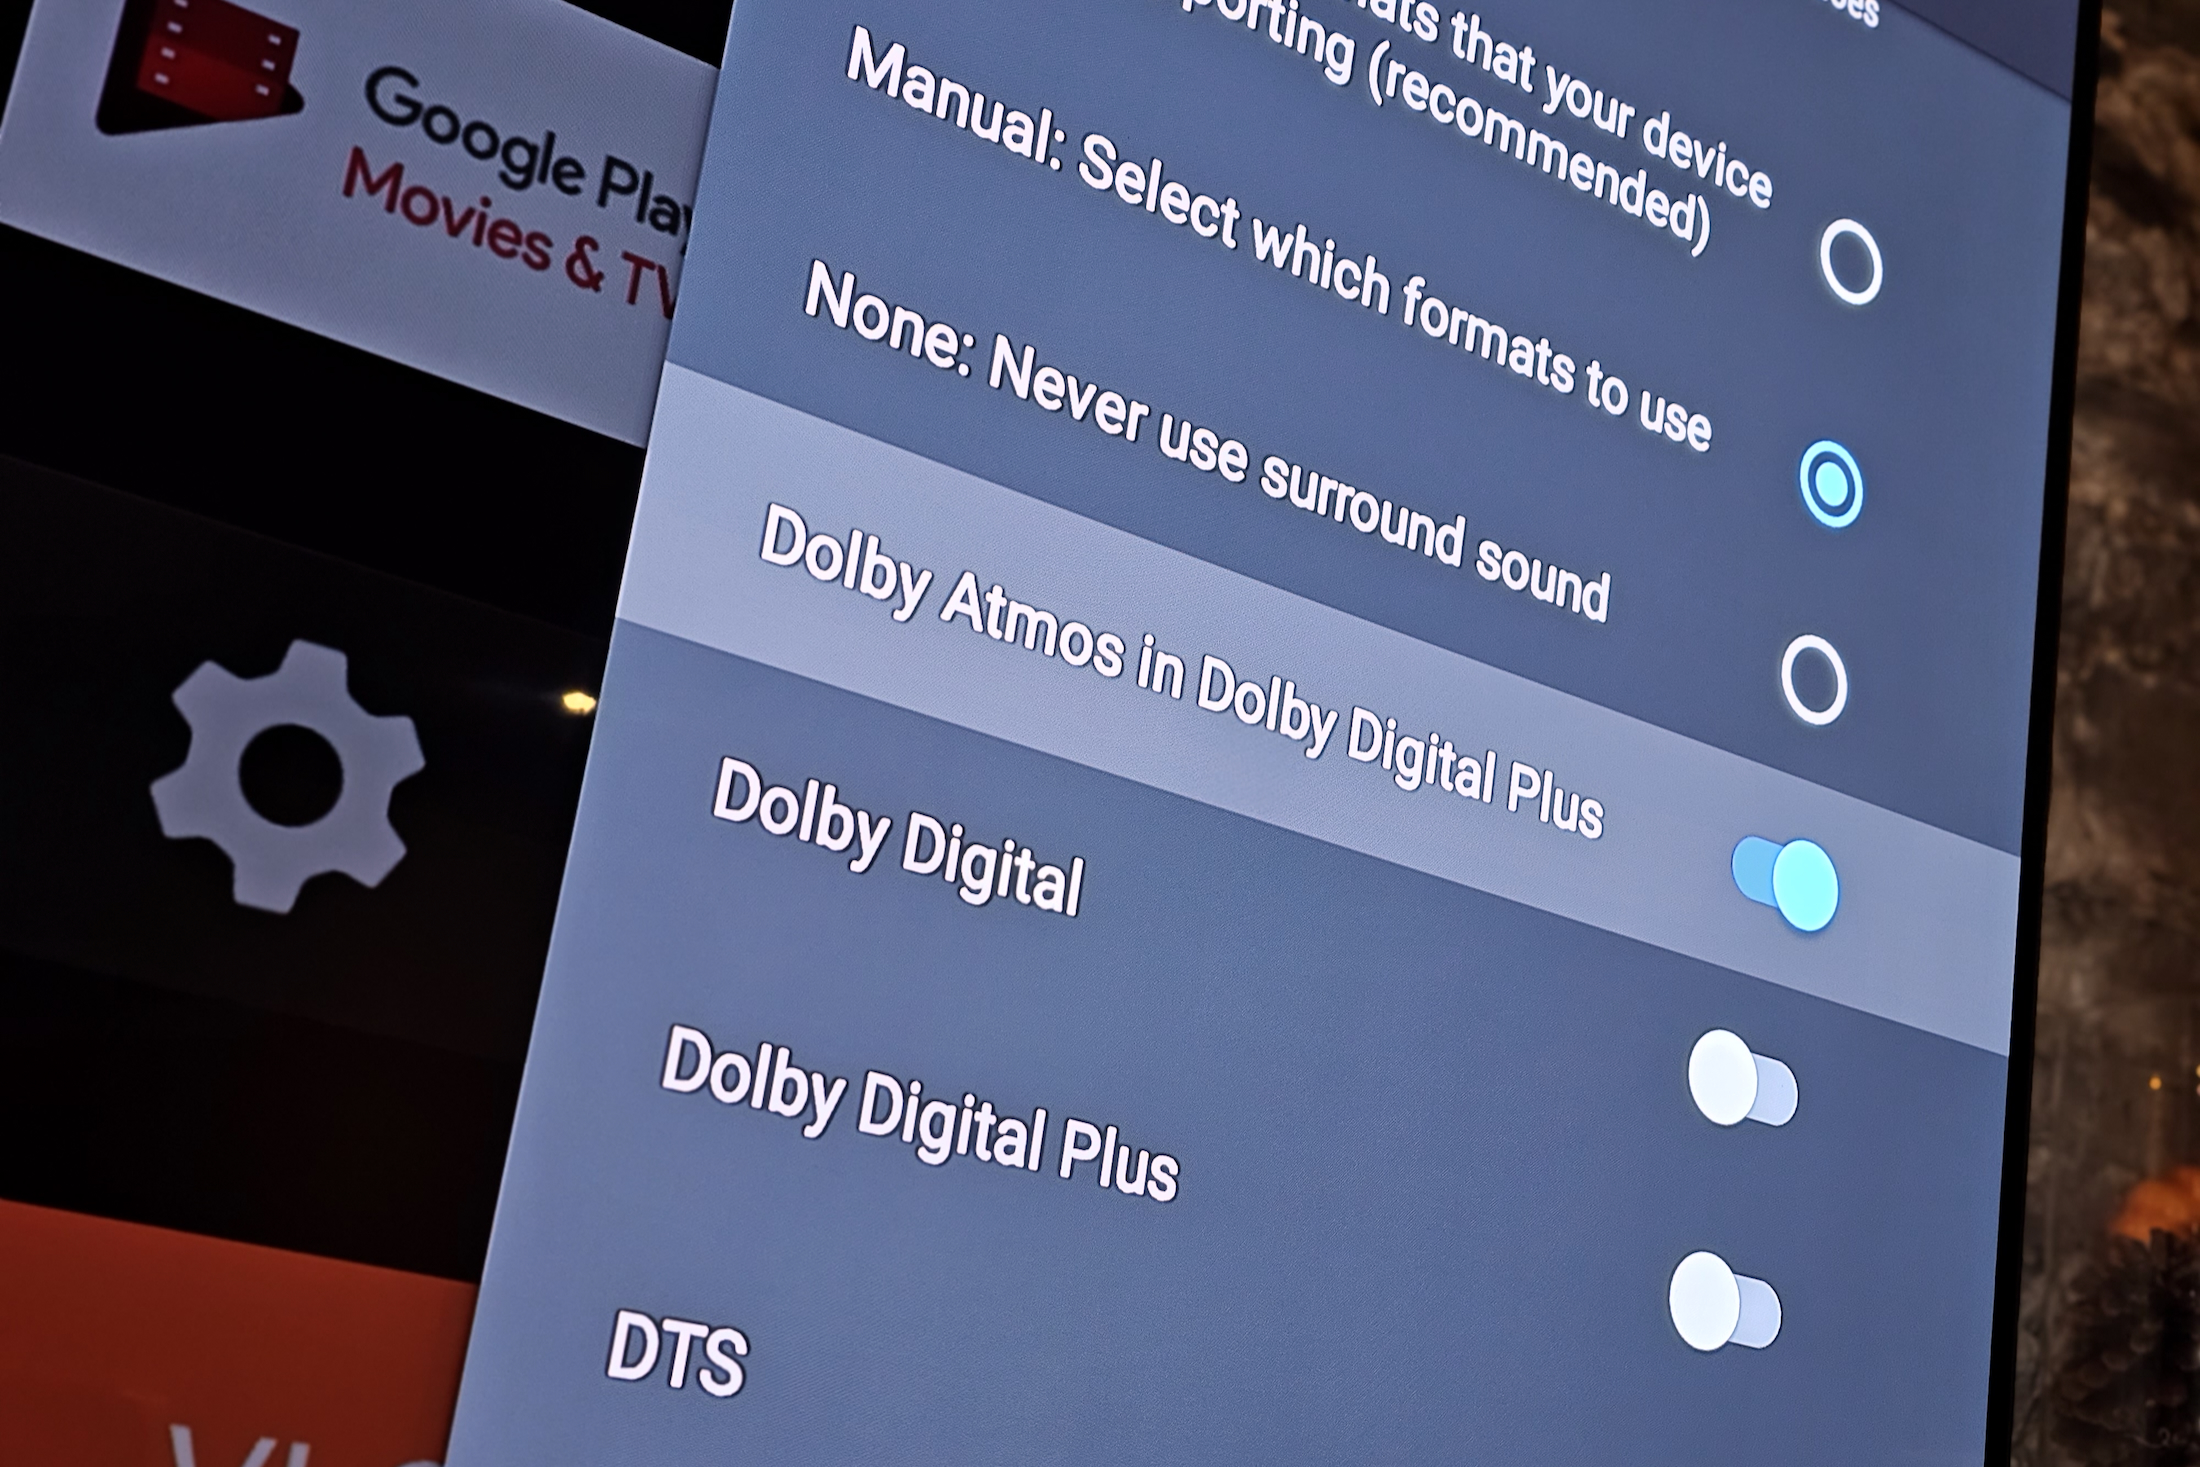 What is Dolby Atmos and how can you get it? - SoundGuys